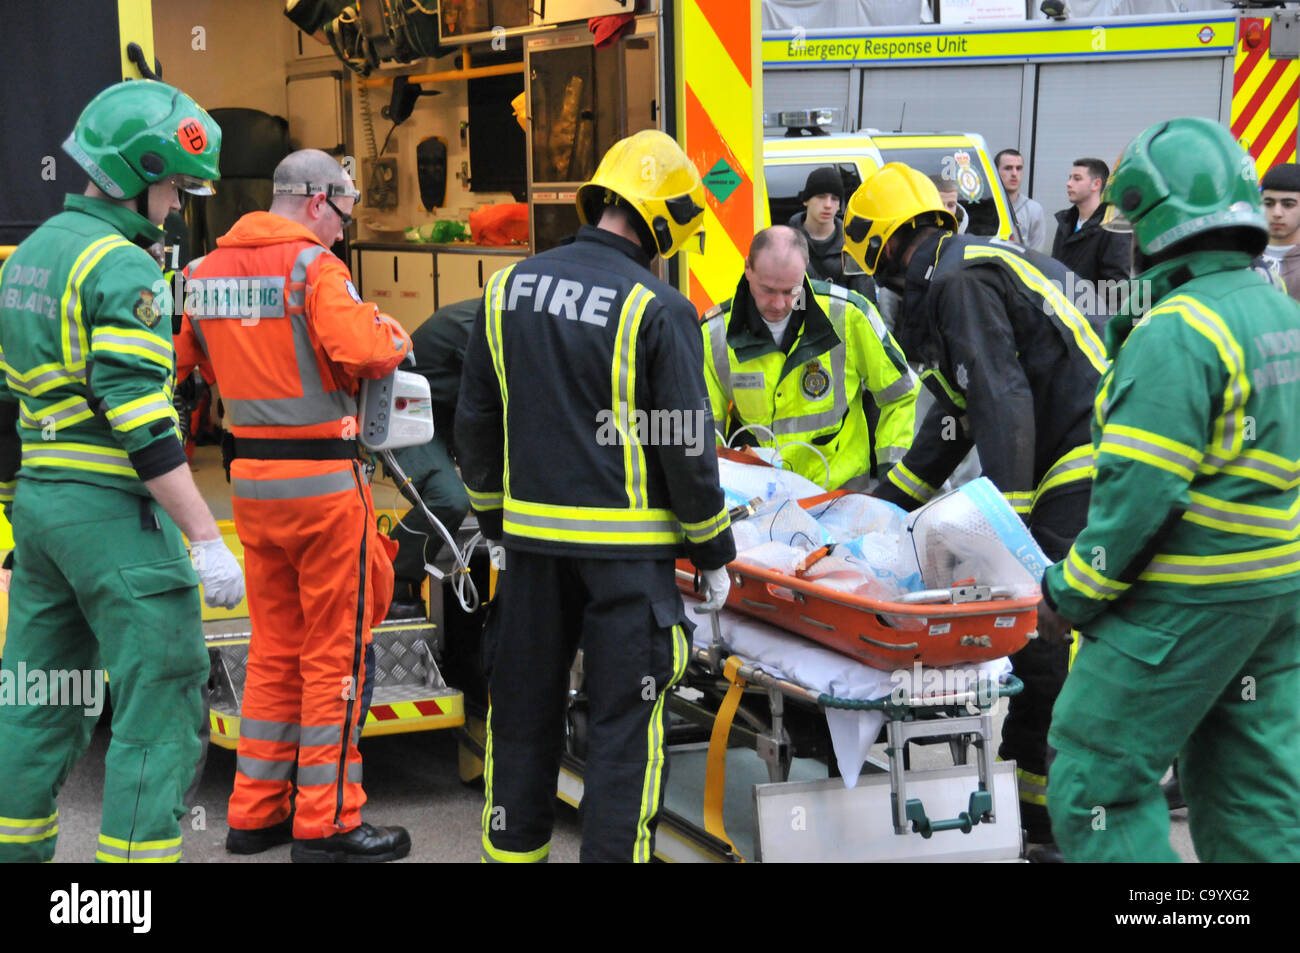 Wood Green London 10/3/12 Person under a train at Wood Green Underground station, paramedics, ambulance staff and police attend the scene as the station is closed to recover the person alive. The injured person is put into the ambulance just after leaving the station. Stock Photo